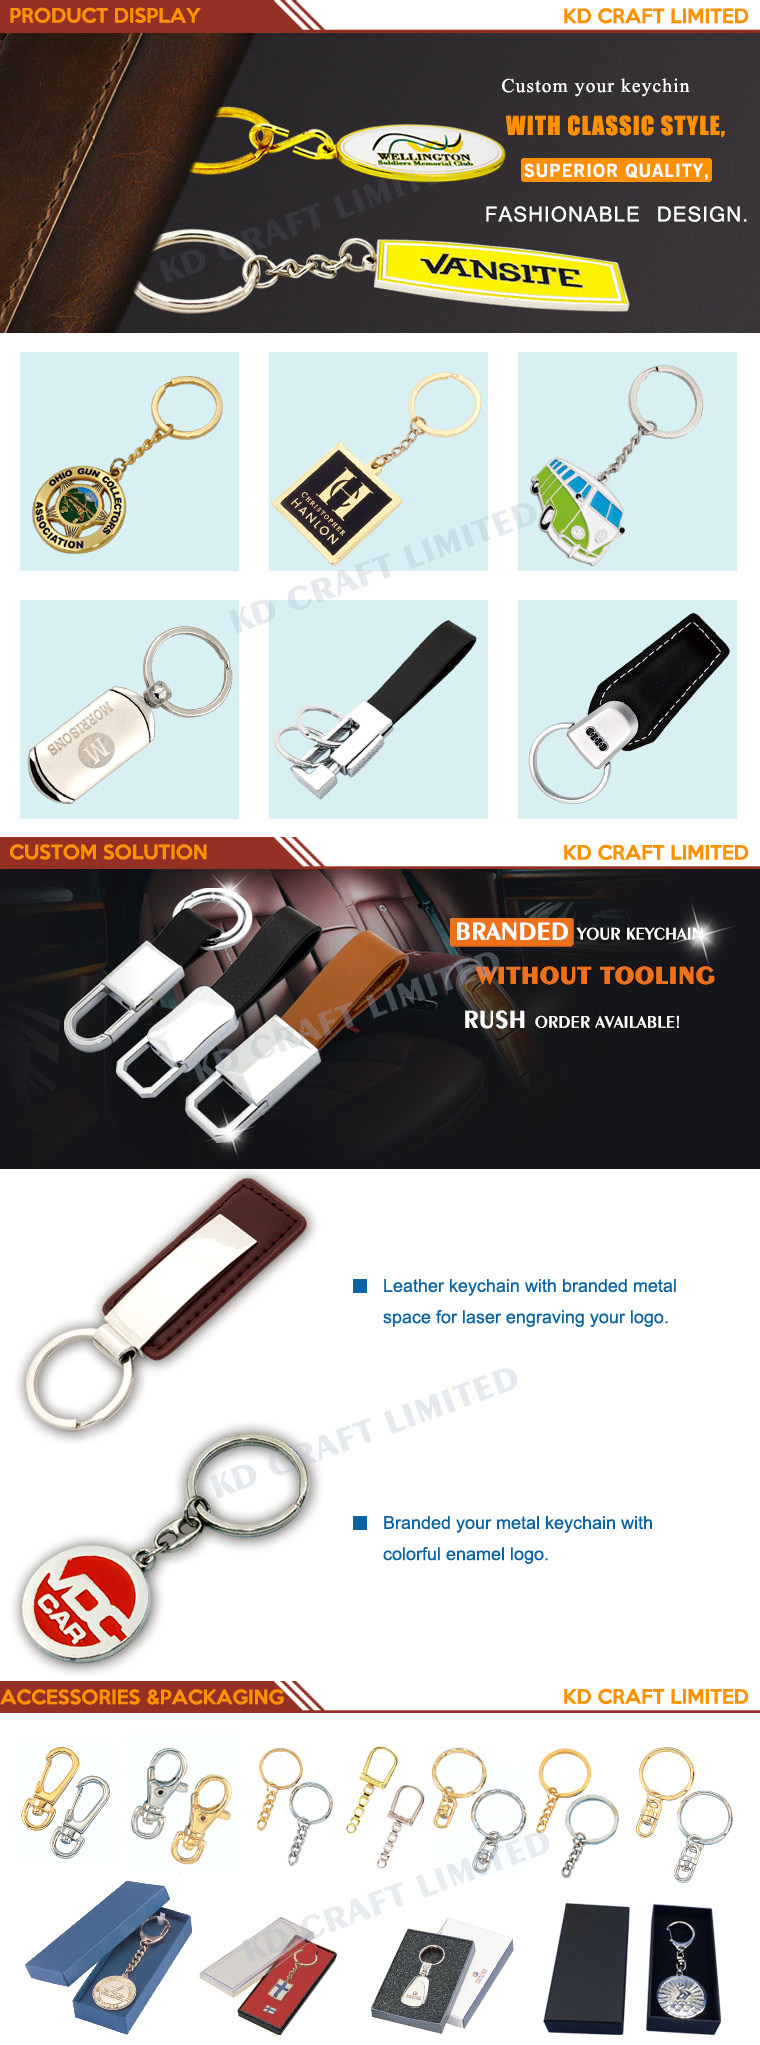 Manufacturer Promotional Gift Special Design Personal Logo Metal Genuine Leather Key Chain in High Quality